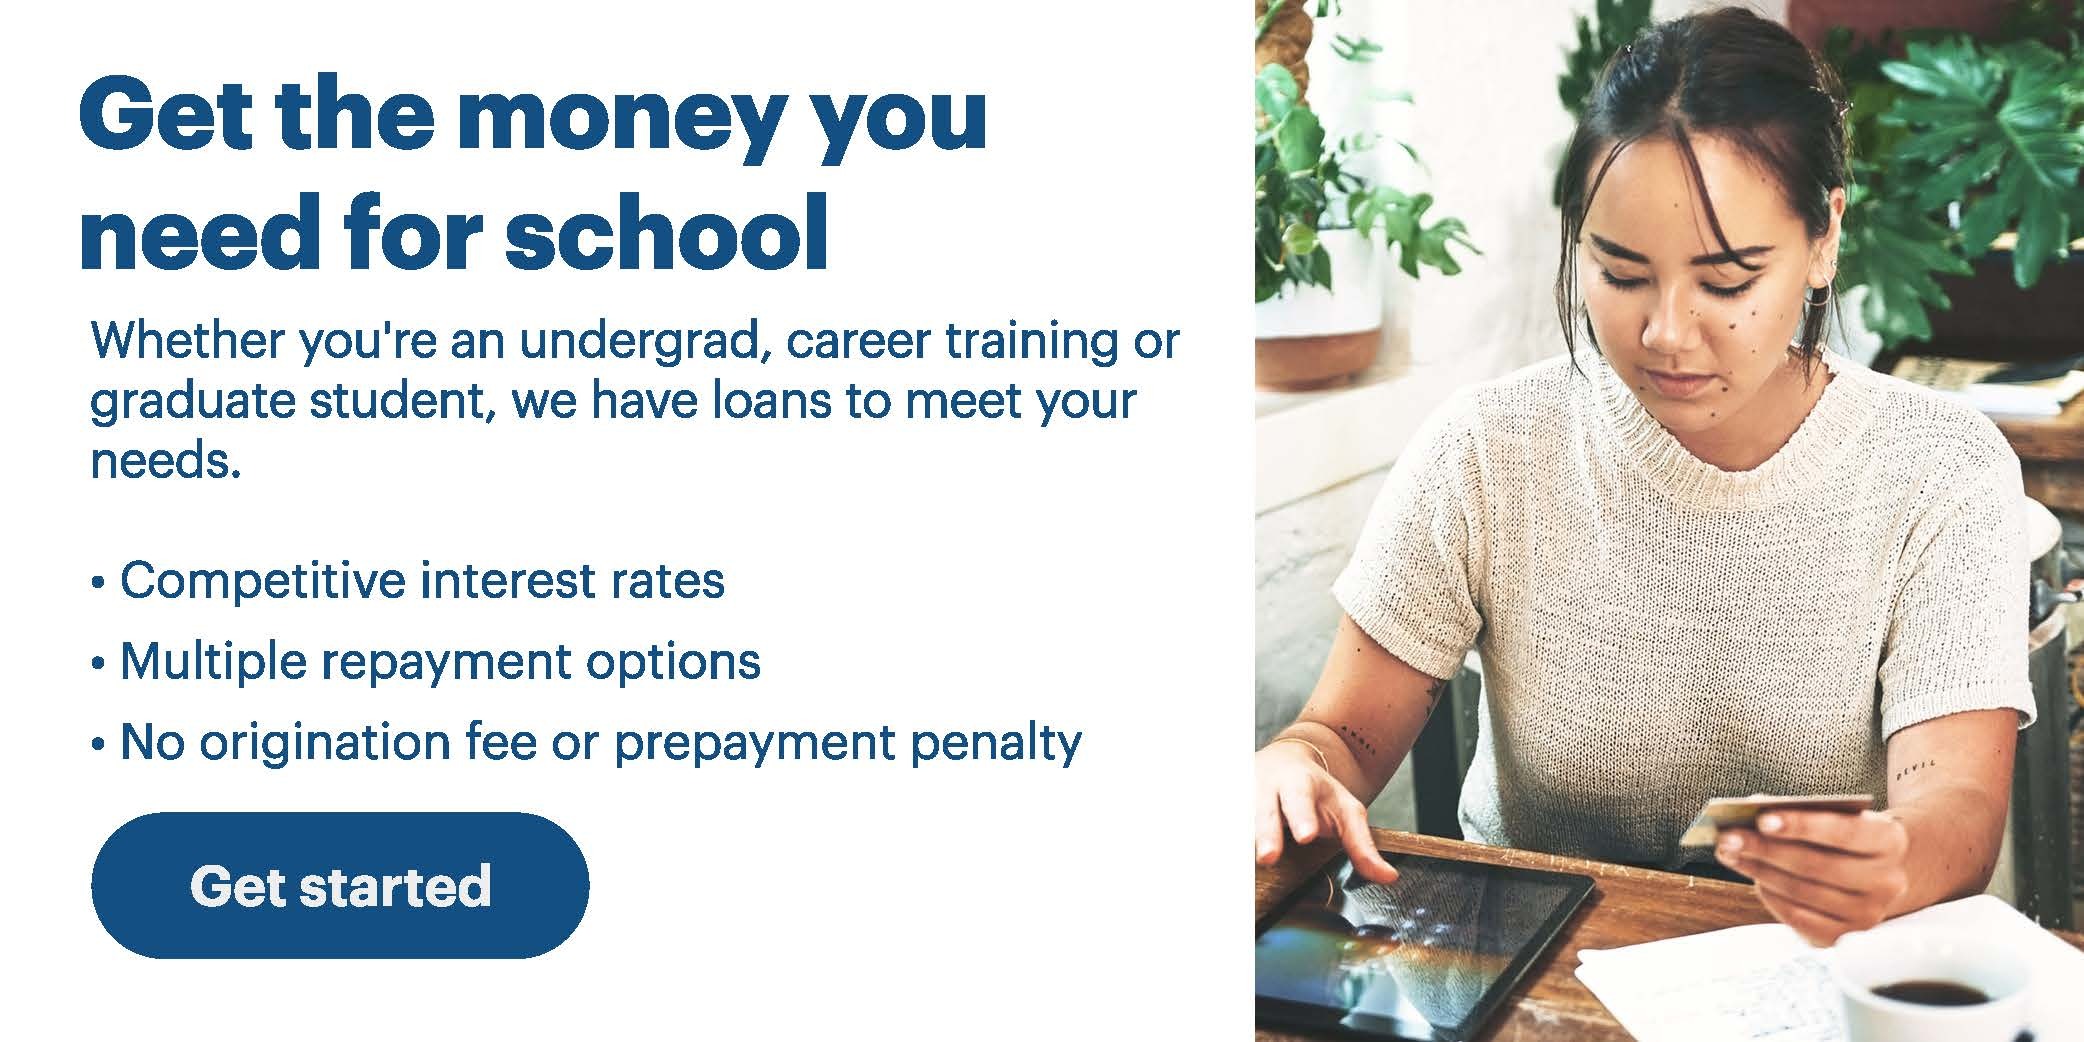 South University-Accelerated Graduate Programs Private Student Loans by SallieMae for South University-Accelerated Graduate Programs Students in Atlanta, GA